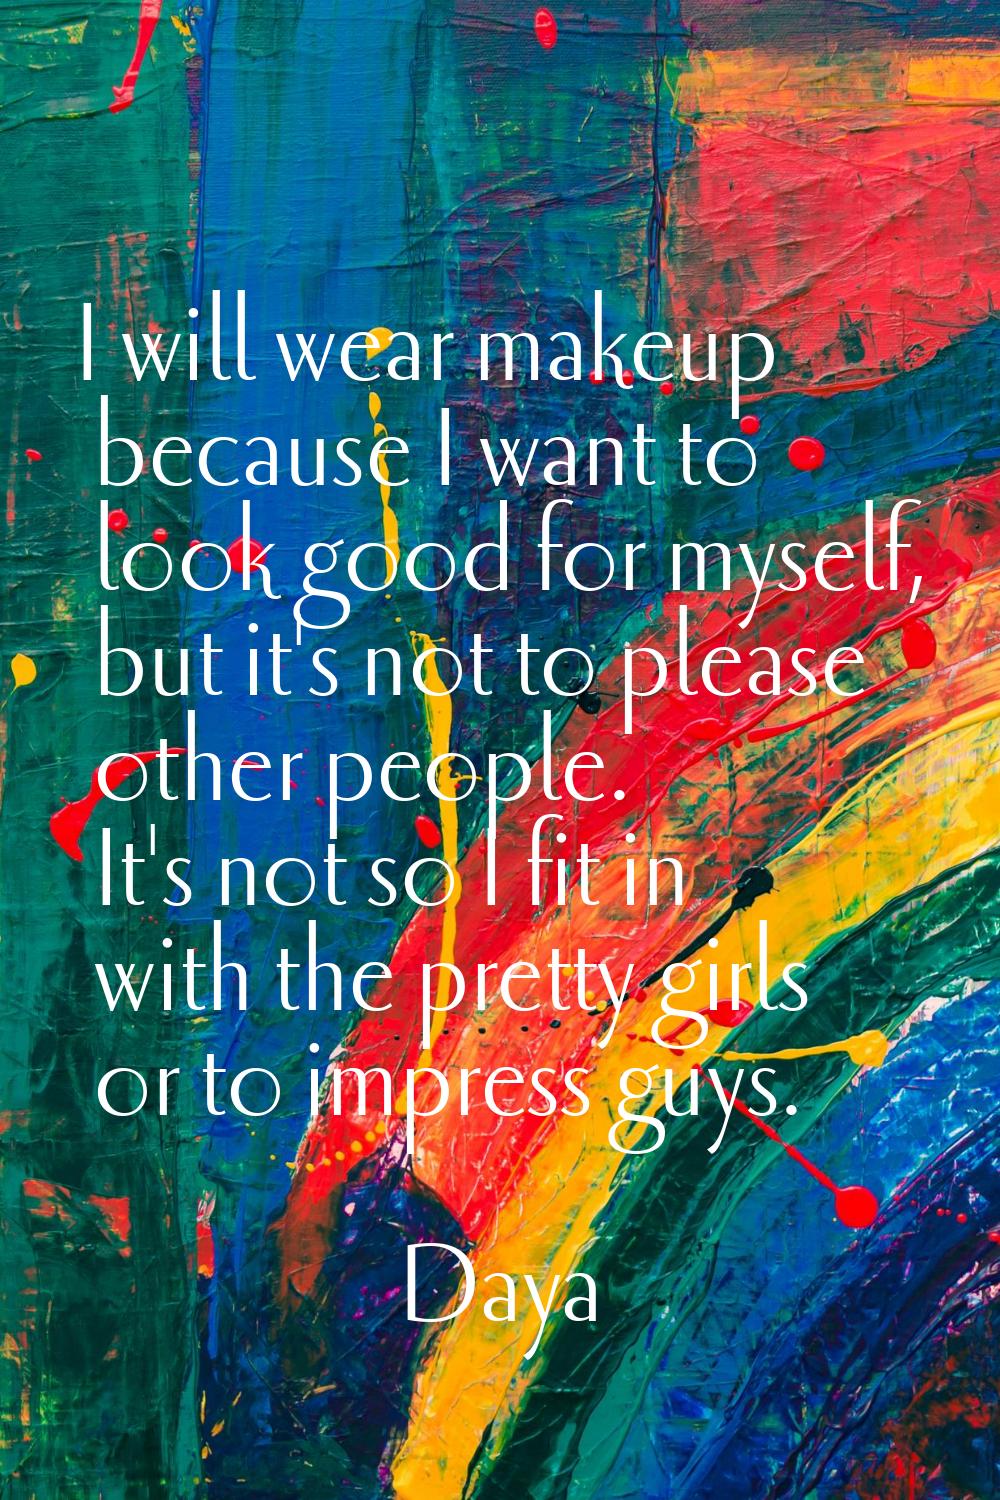 I will wear makeup because I want to look good for myself, but it's not to please other people. It'